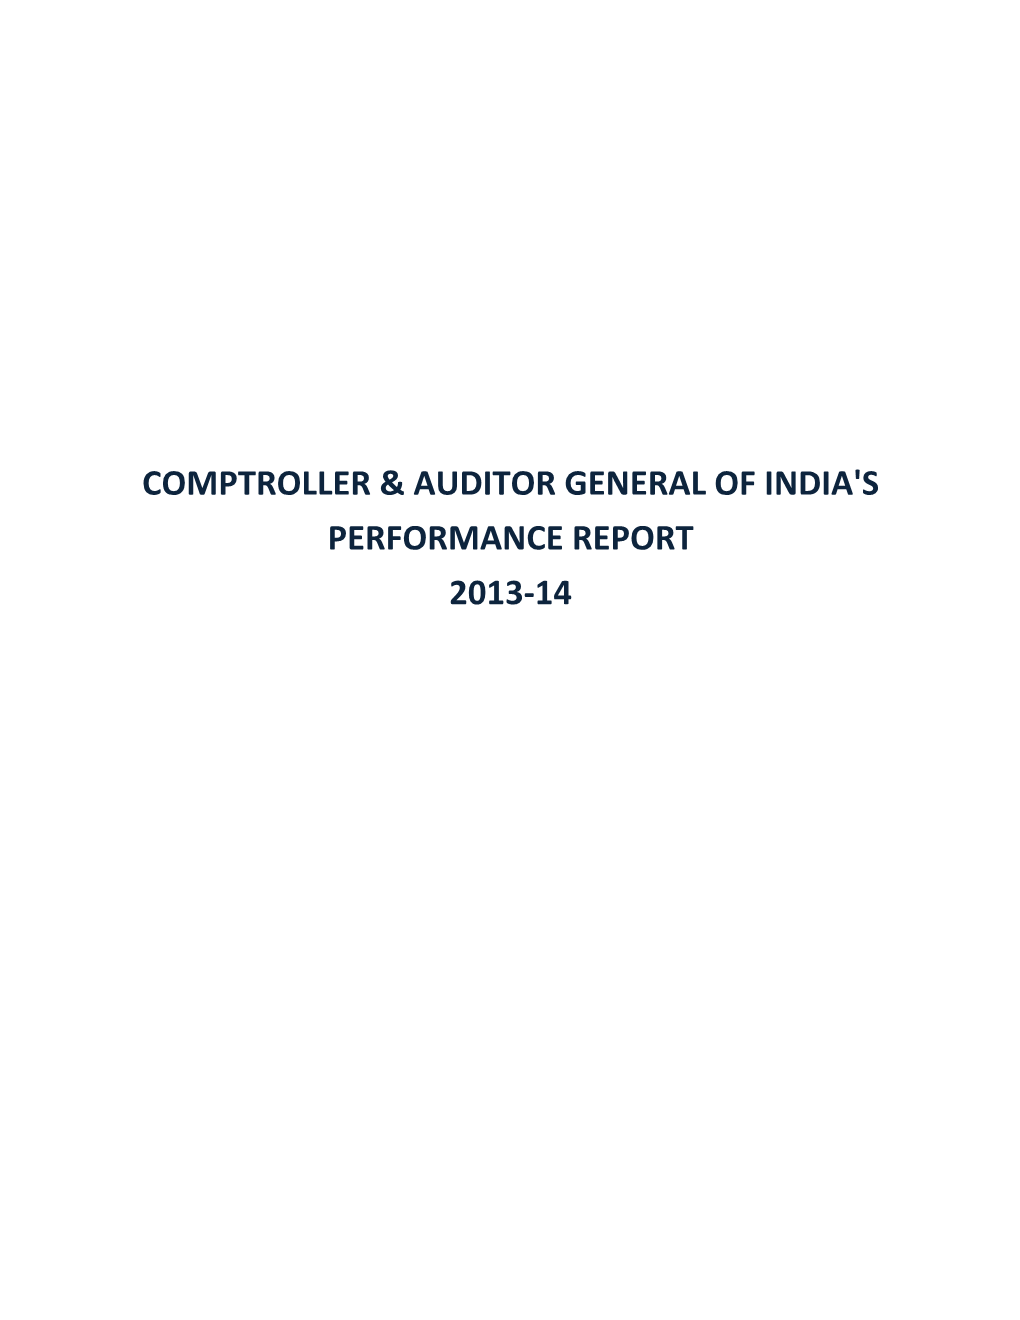 Comptroller & Auditor General of India's